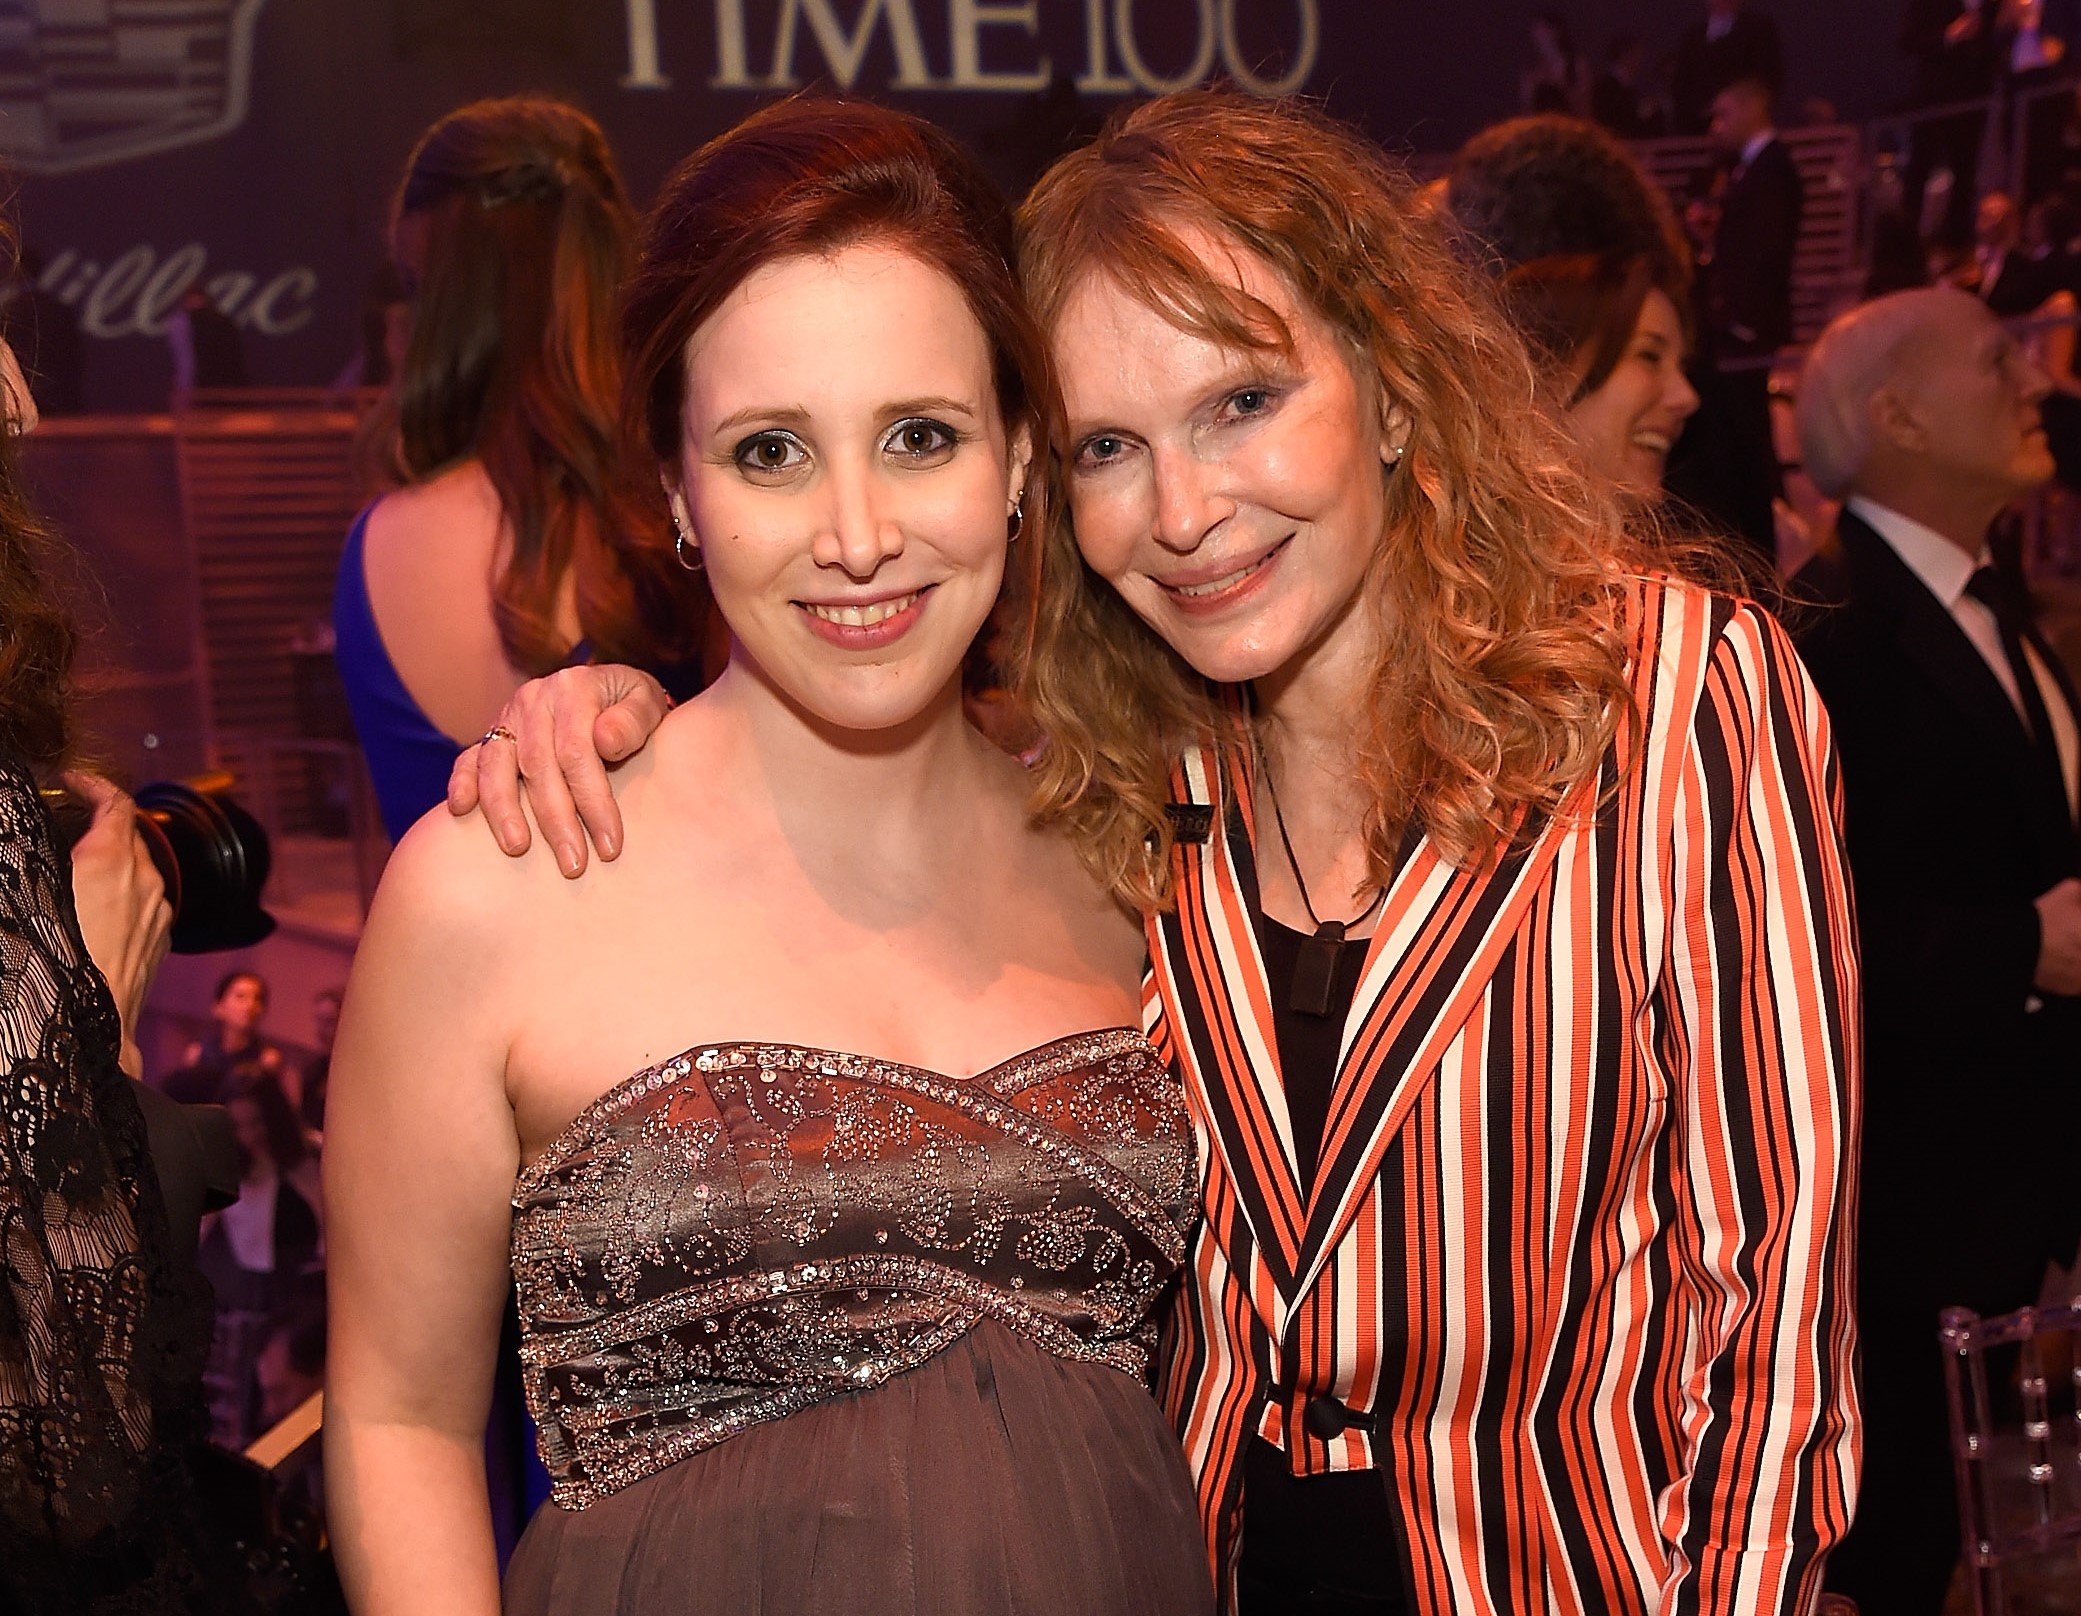 Dylan Farrow and Mia Farrow at the 2016 Time 100 Gala,in 2016, in New York City. | Source: Getty Images